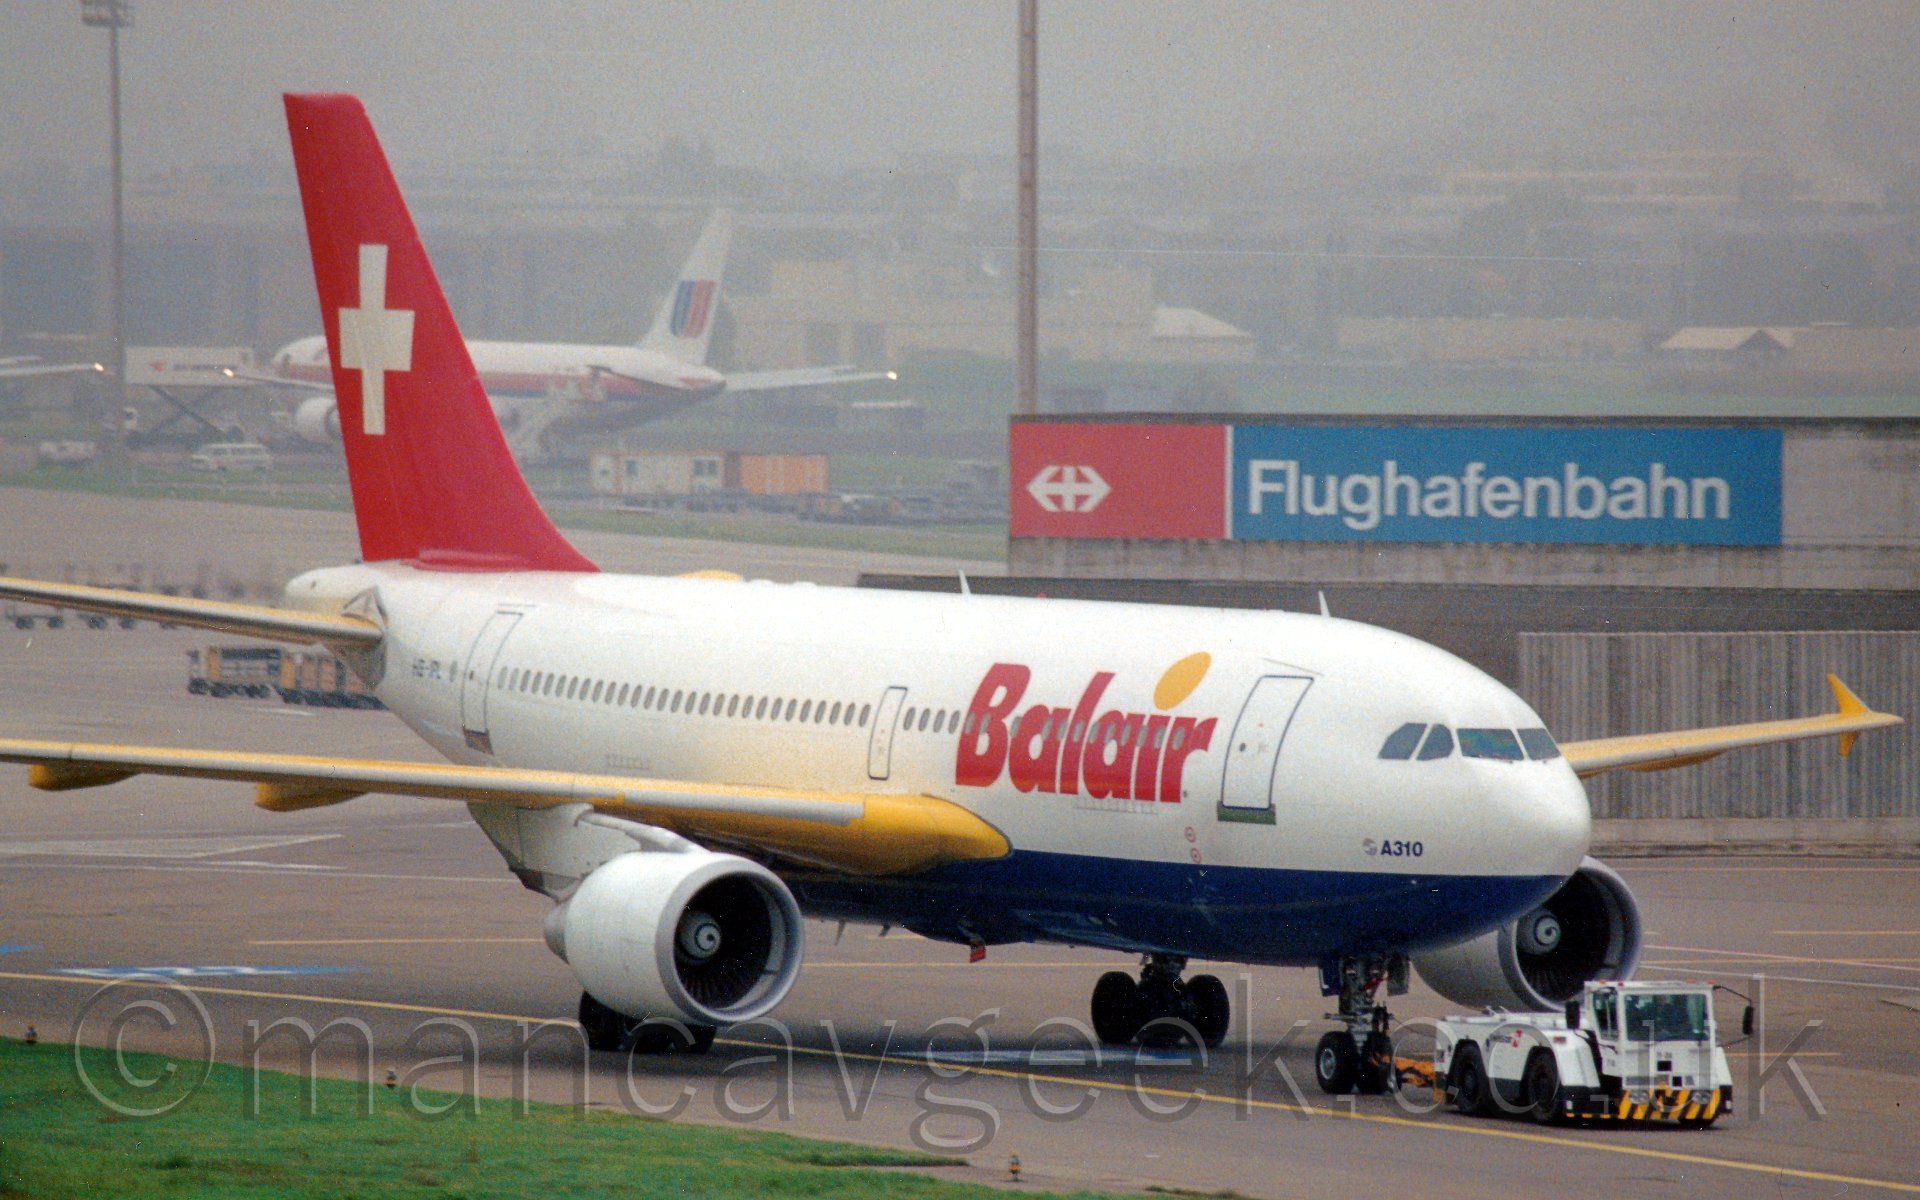 Side view of a twin engined white jet airliner with a blue belly and a red tail being towed from left to right by a white tug. The plane has red "Balair" titles on the lower forward fuselage, and a large white cross on the tail. In the In the background, a large blue and red sign with white "Flughafenbahn" titles adorns the side of a low building, with planes clustered around larger buildings, vanishing in to haze in the distance.